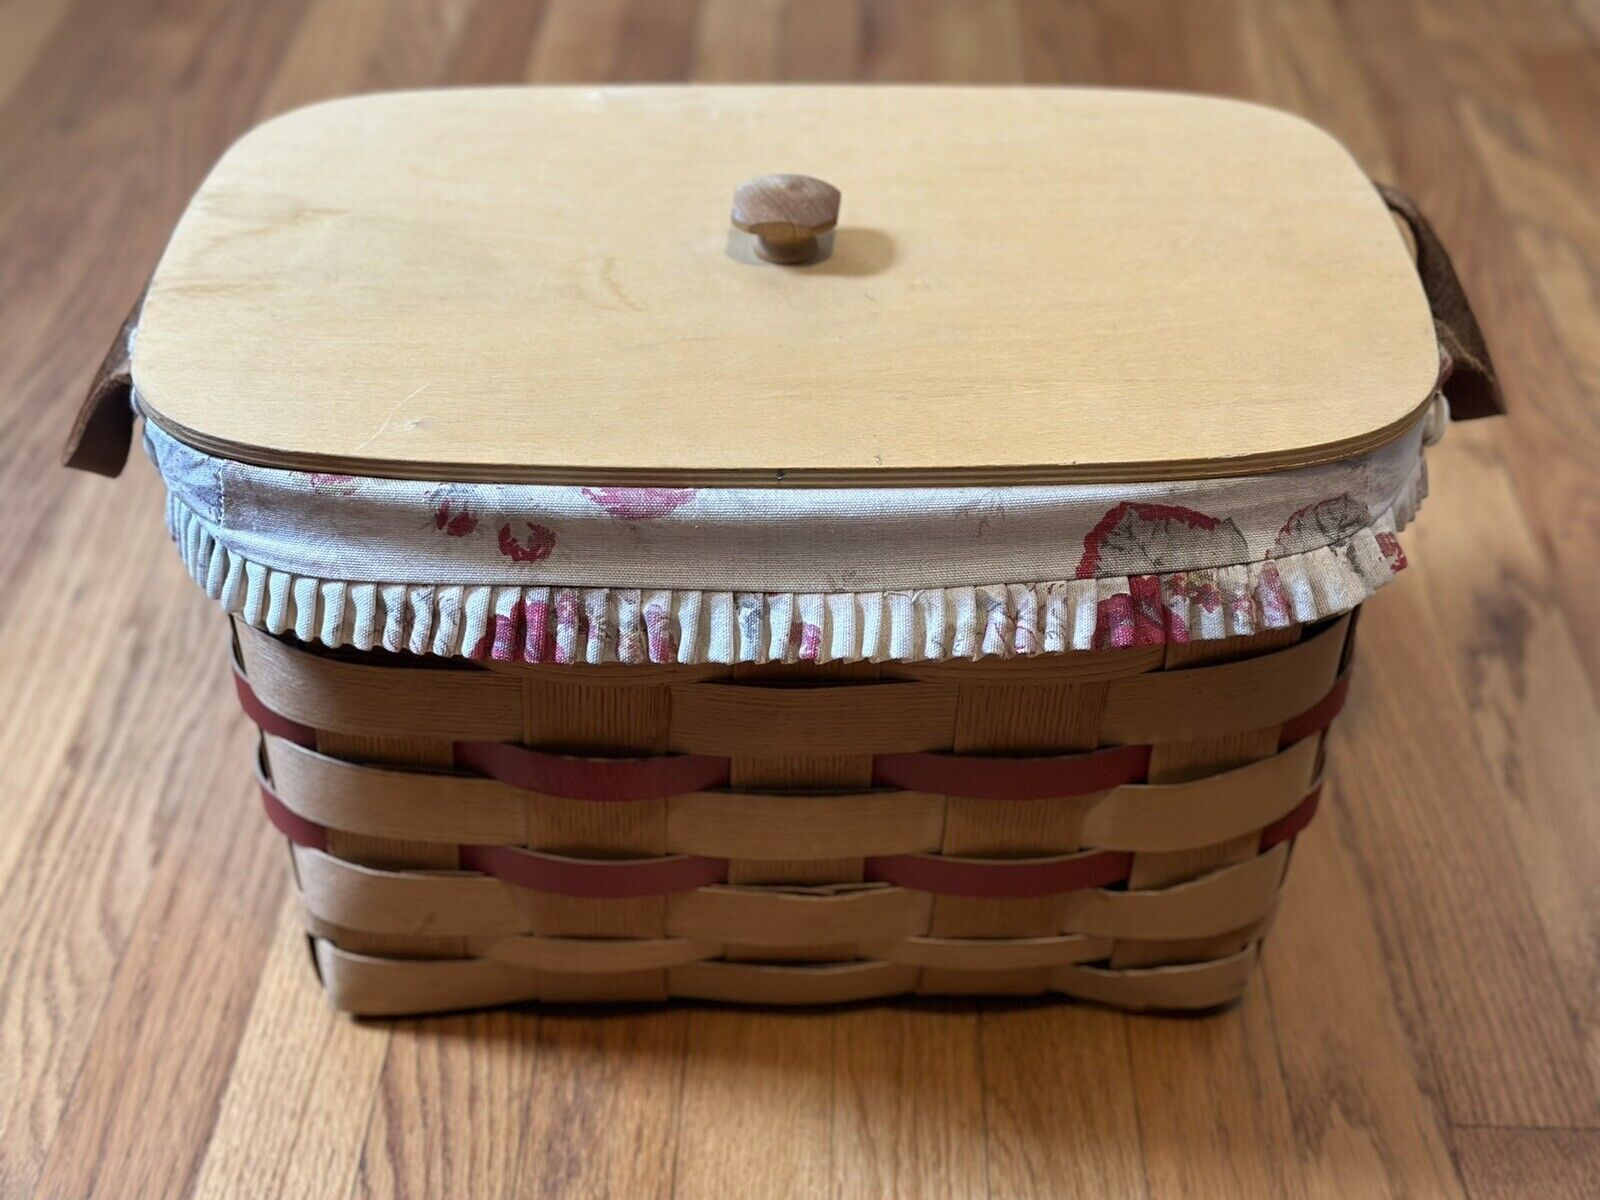 Vintage Peterboro Picnic Basket with Wood Lid And Floral Lining, Leather Straps